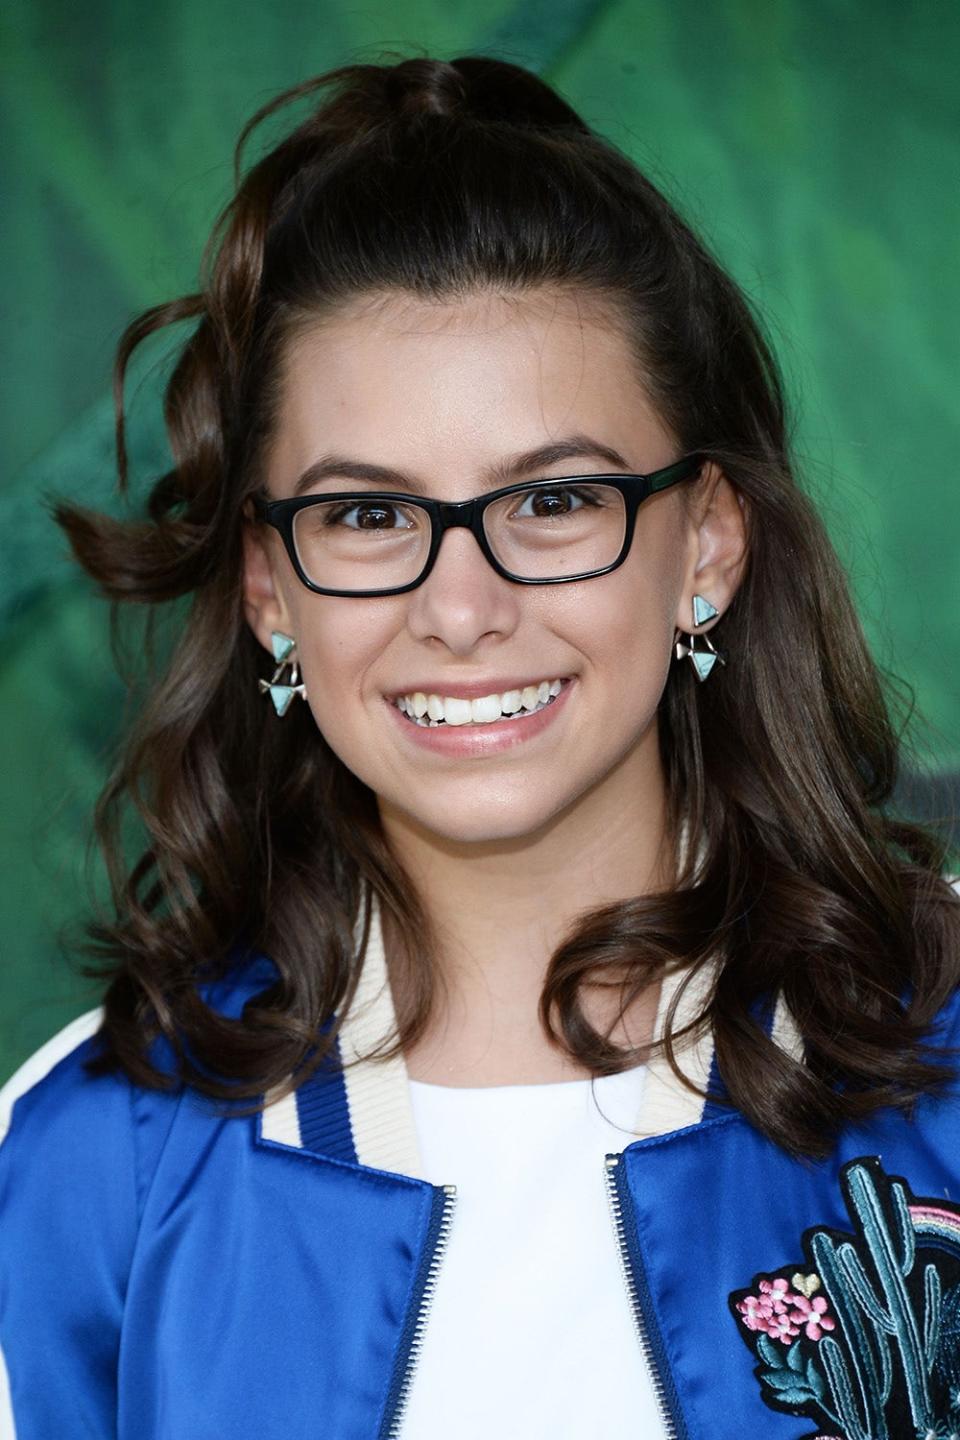 A close-up of a young Madisyn Shipman with glasses